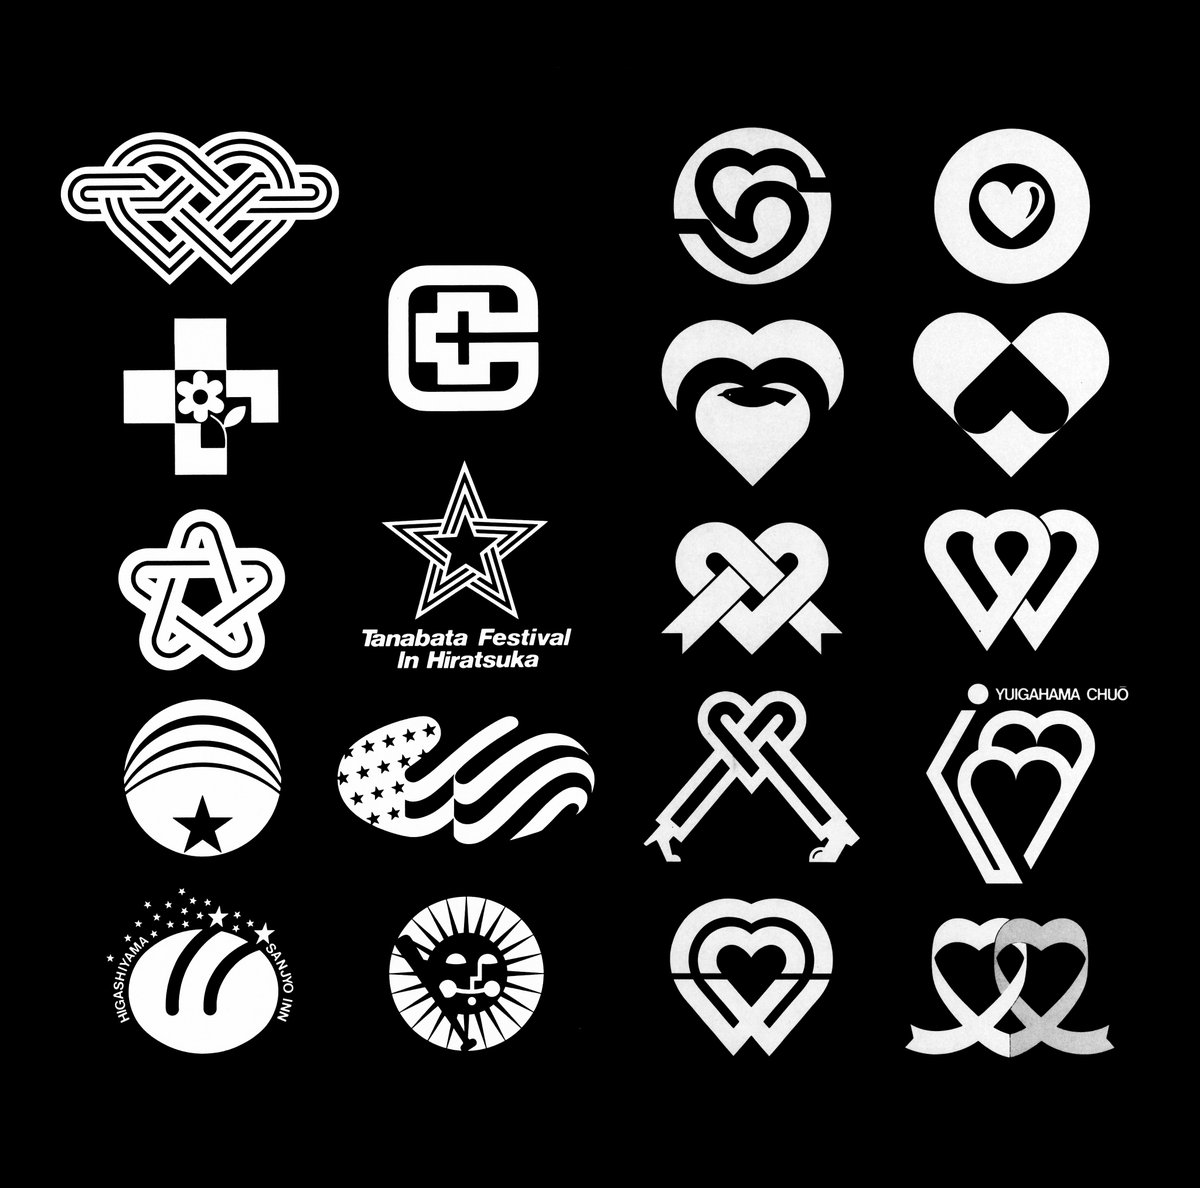 Logos scanned from Trademarks, Symbolmarks & Logotypes In Japan, 1980-81, Graphic-sha Ltd, 1980. designreviewed.com/artefacts/trad…